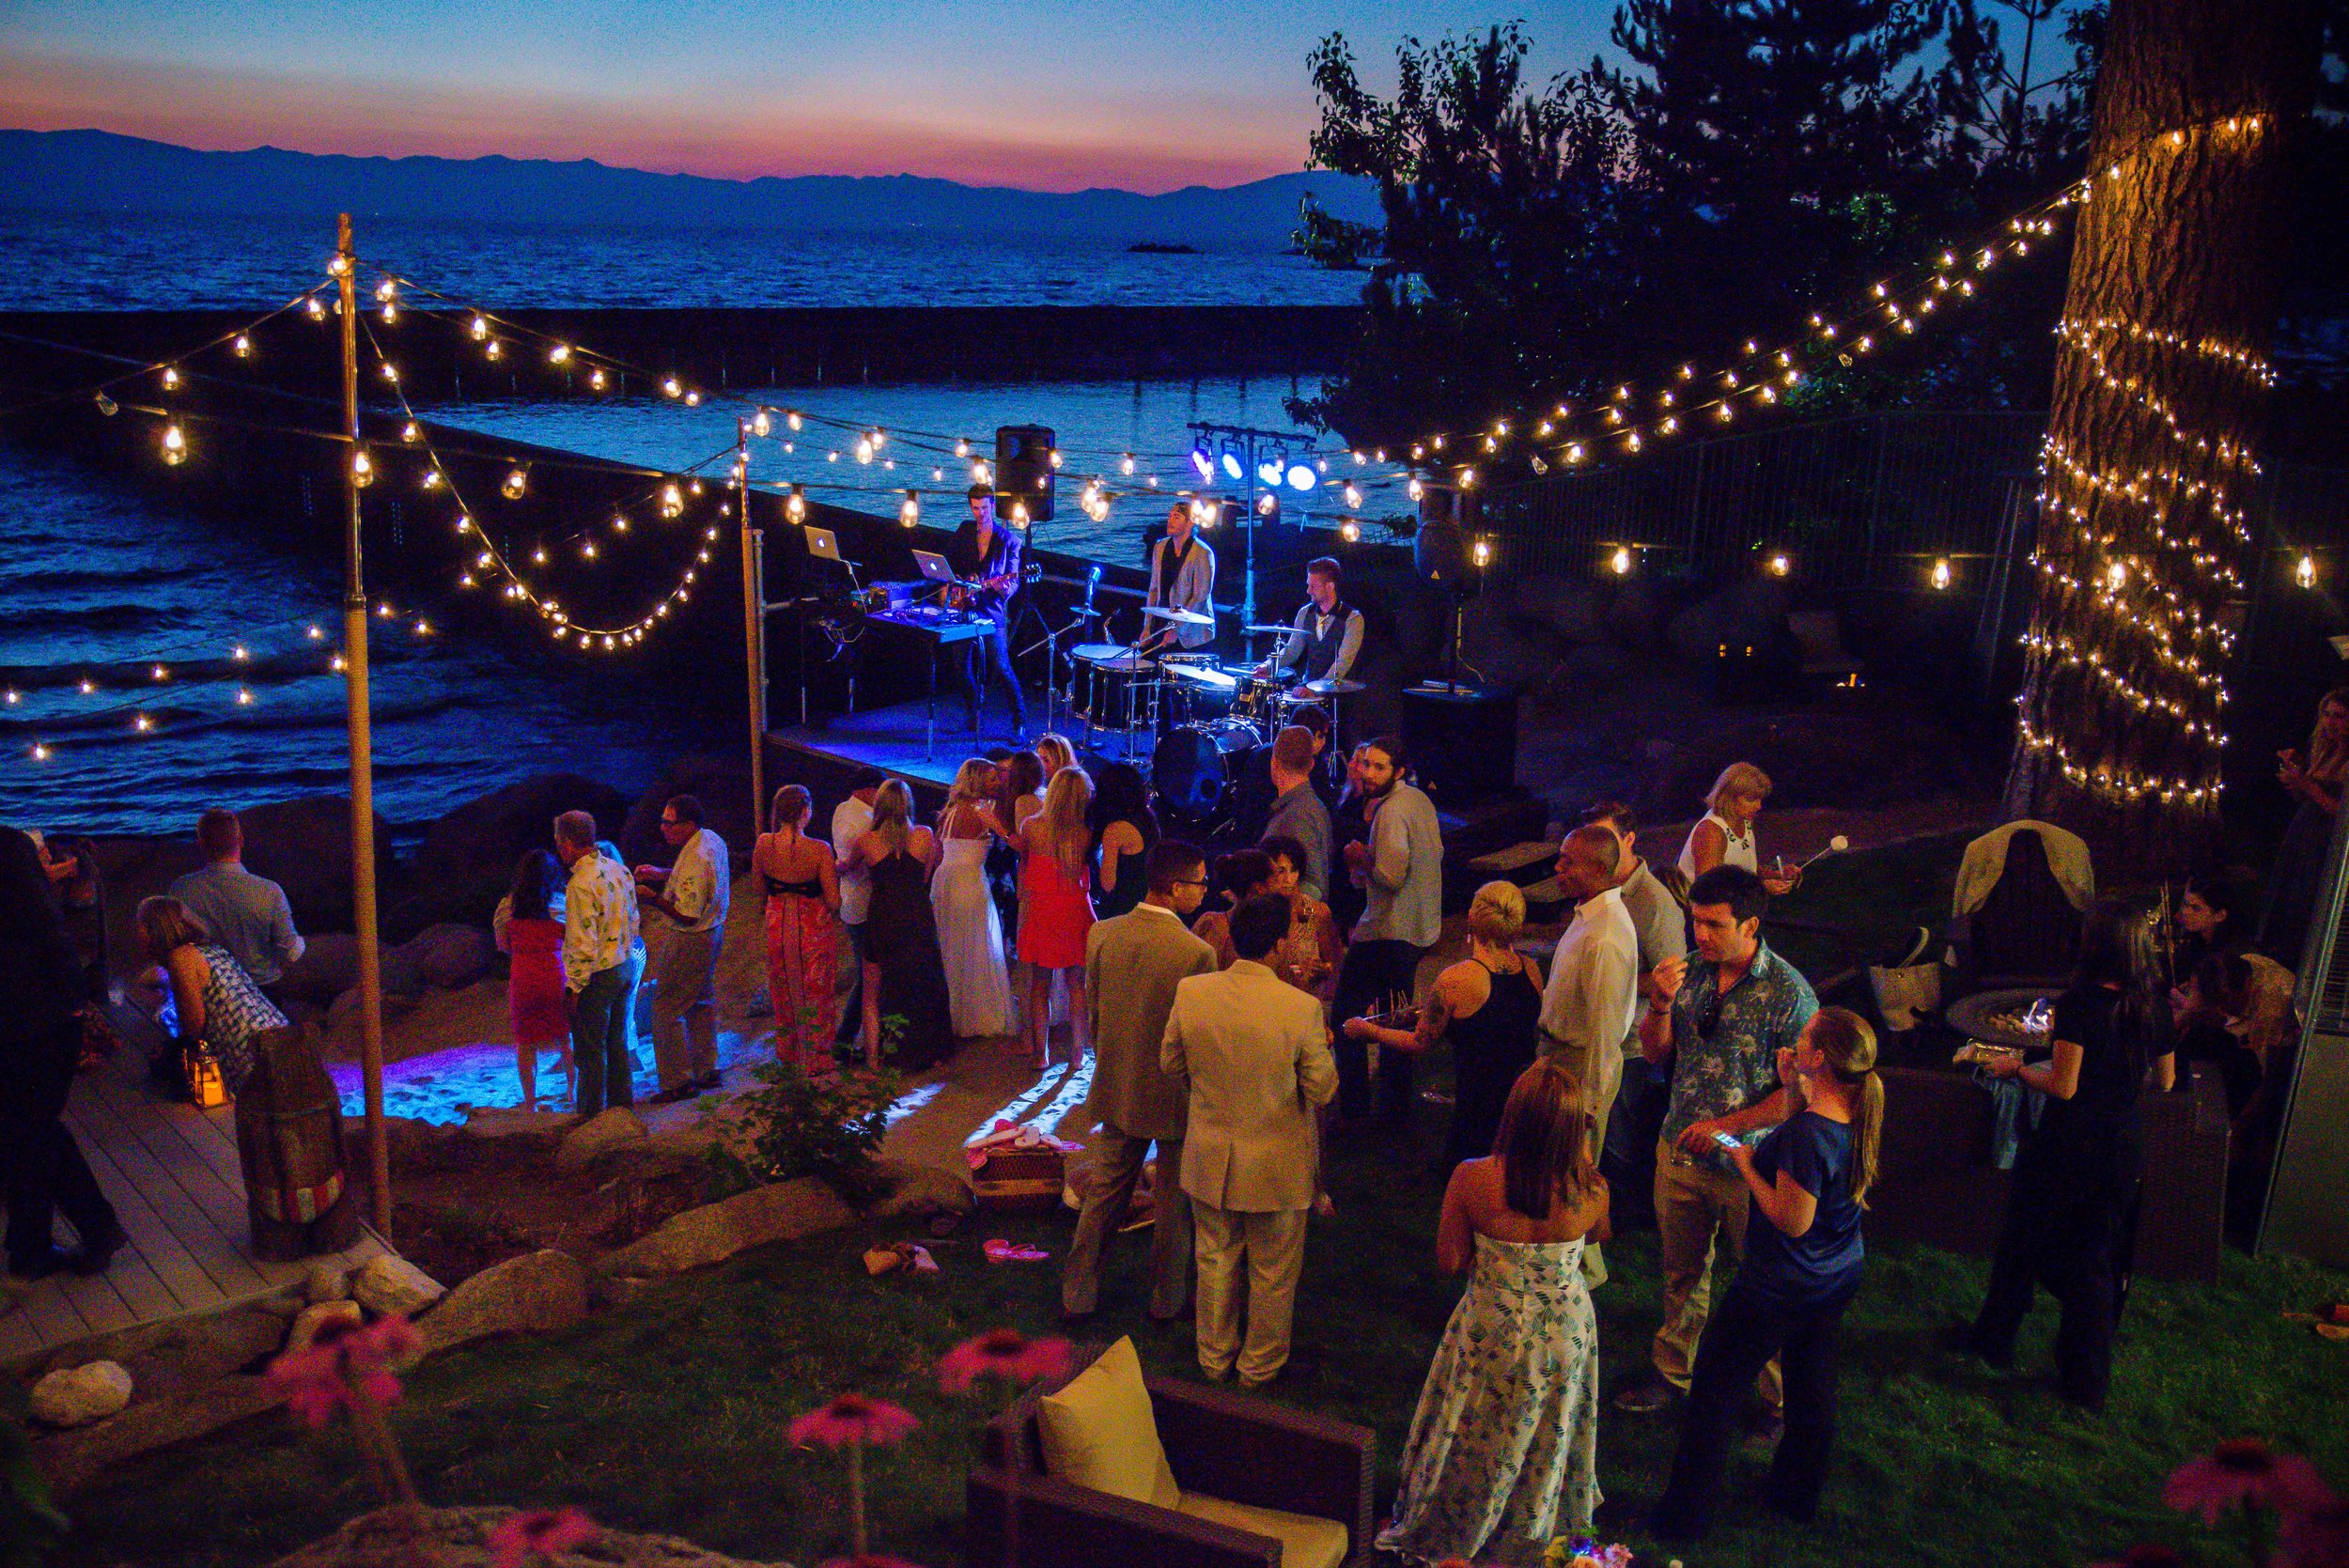 Soulcirque is a DJ Fusion Band that blends DJ'ing with live instruments. Great for private parties, corporate events, and weddings. Options include Drums, Saxophone, Violin, Guitar.